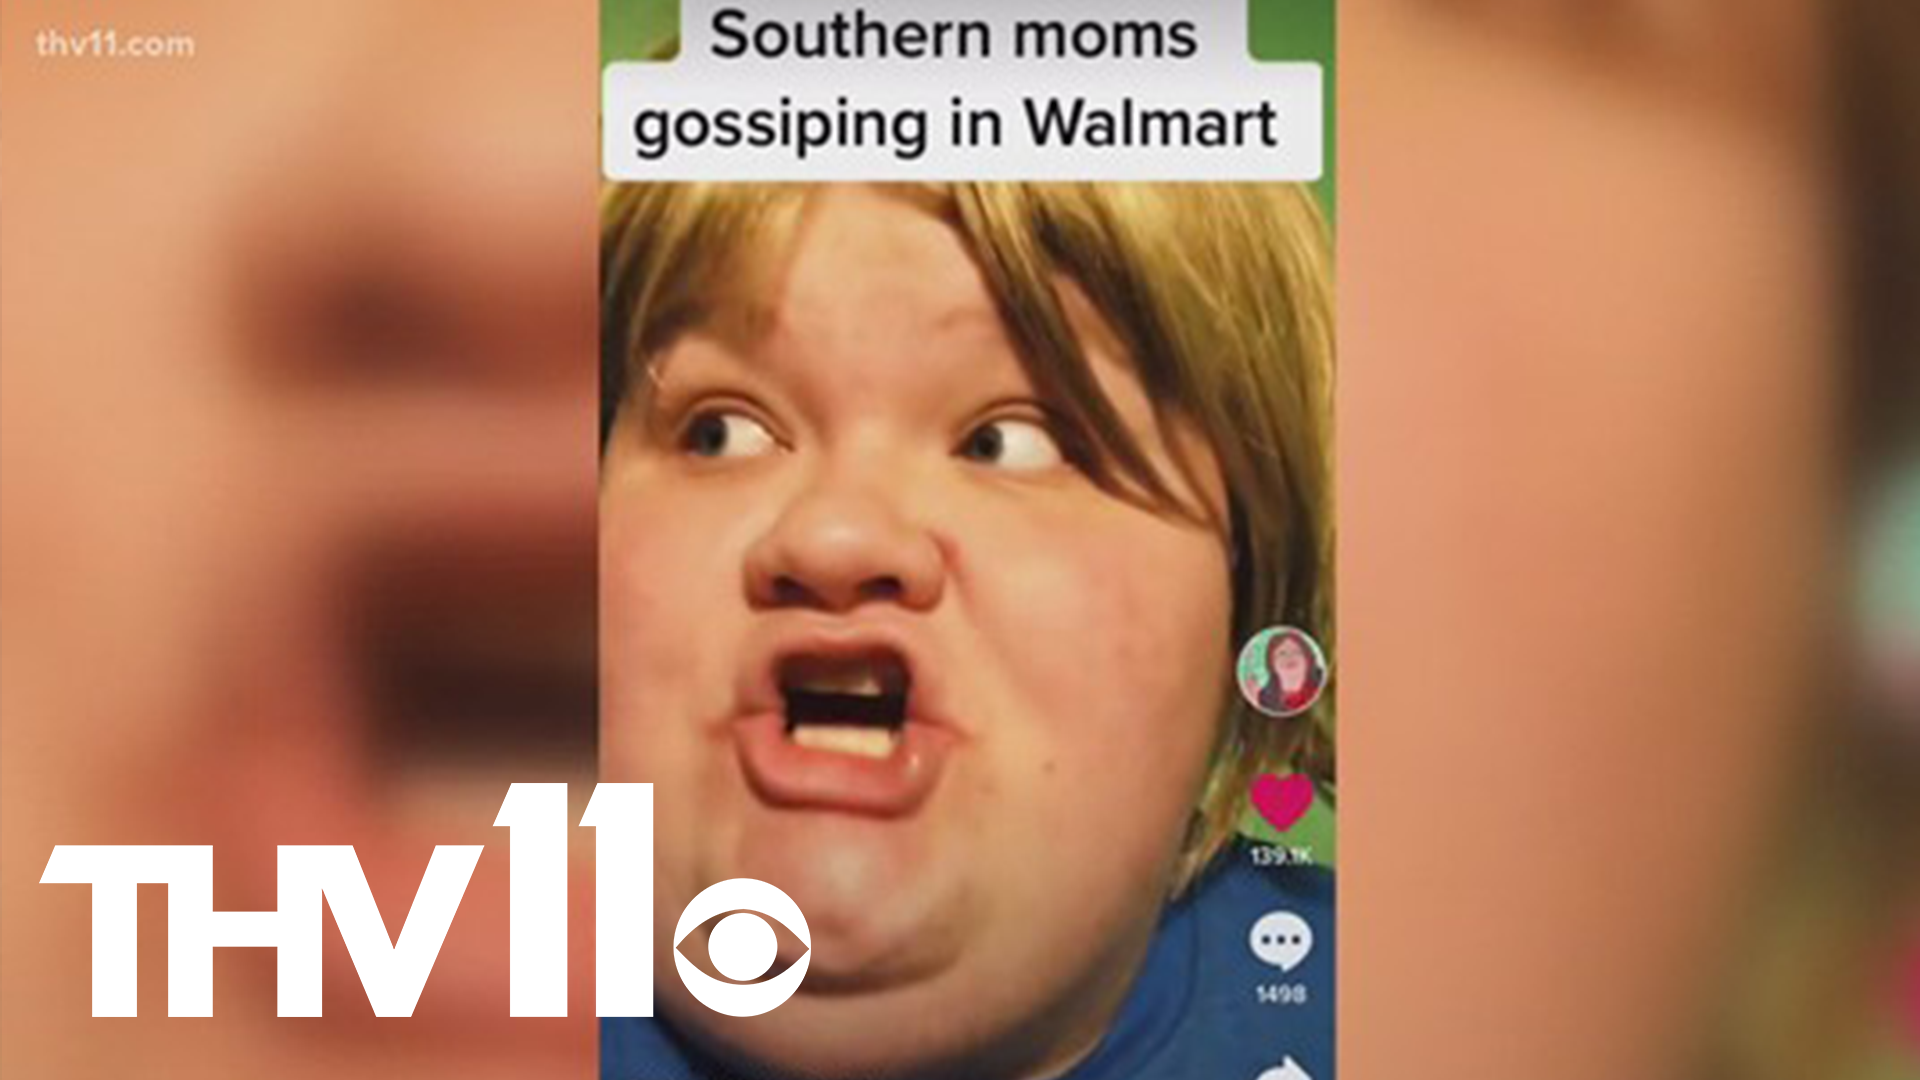 Nanny-Maw, social media sensation followed by millions, is a character portrayed by Kyle Kidd from Ashdown Arkansas.